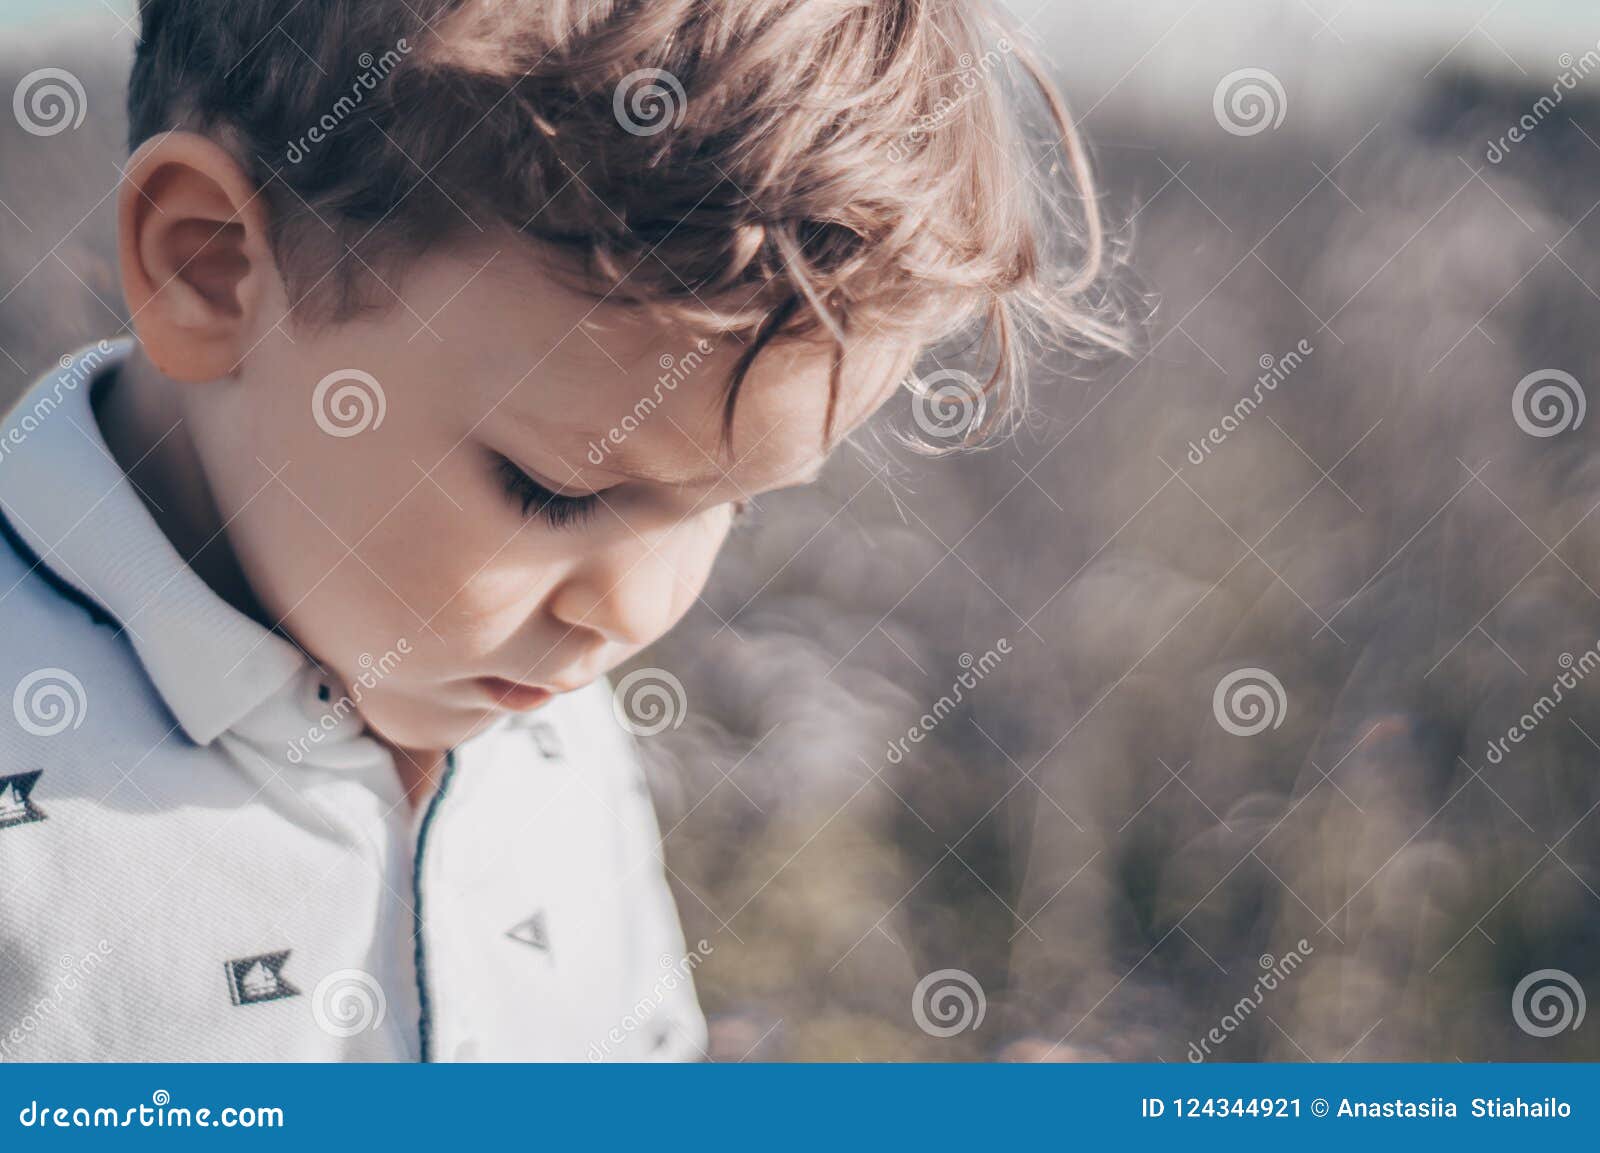 Happy Child, Little Boy Looks Down, Pensive Look in a White T-shirt ...